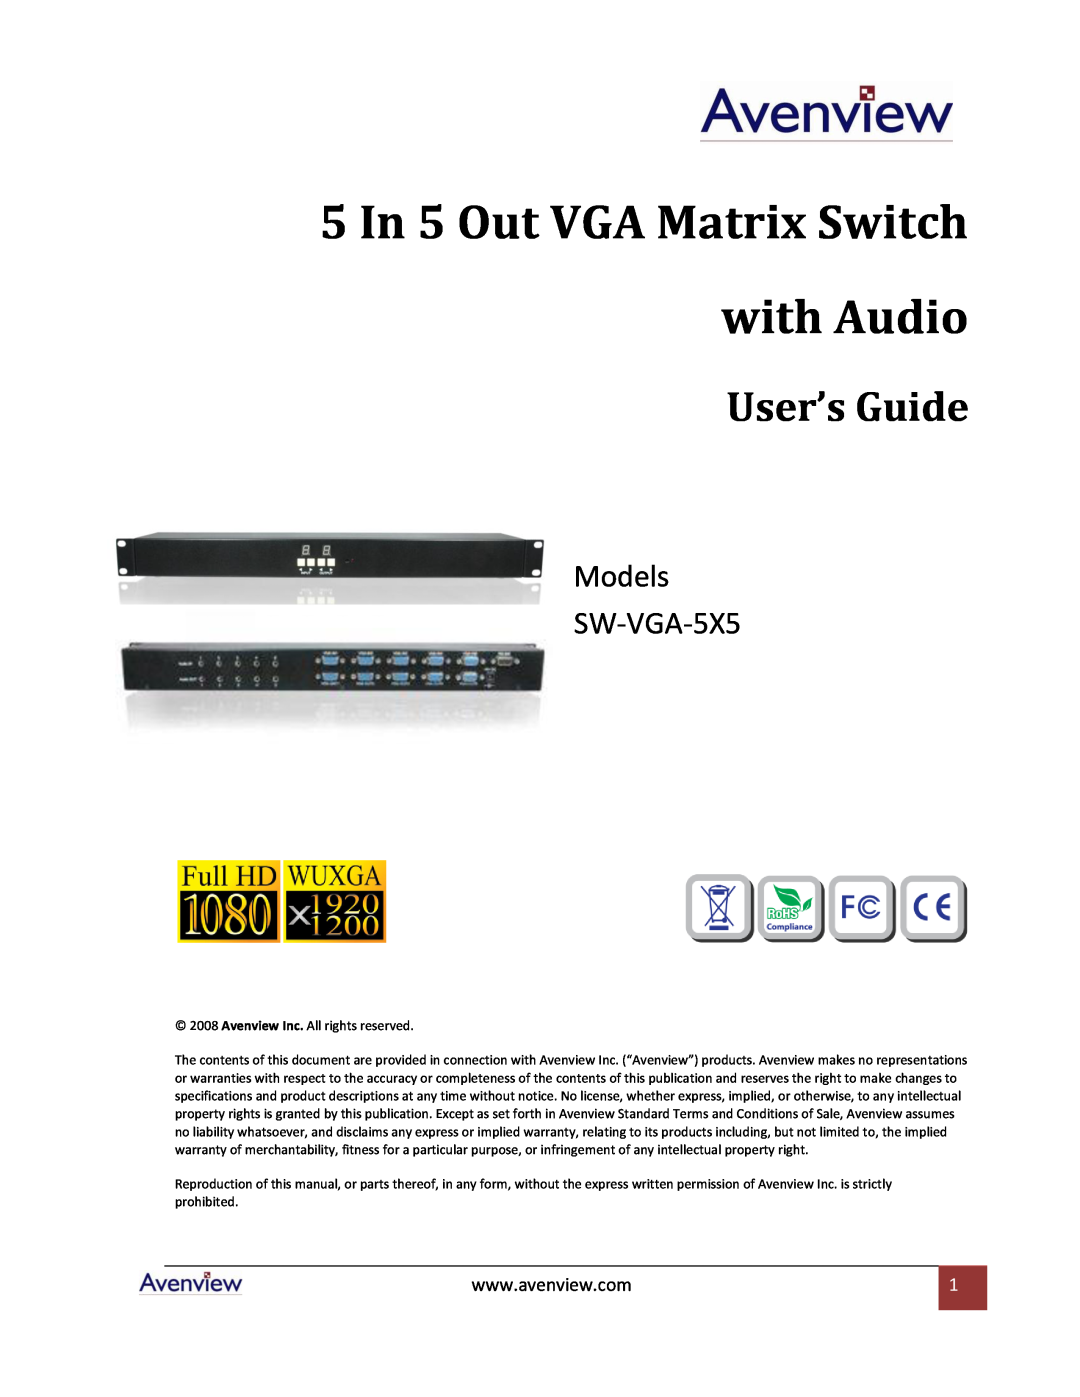 Avenview specifications 5 In 5 Out VGA Matrix Switch with Audio, User’s Guide, Models SW-VGA-5X5 